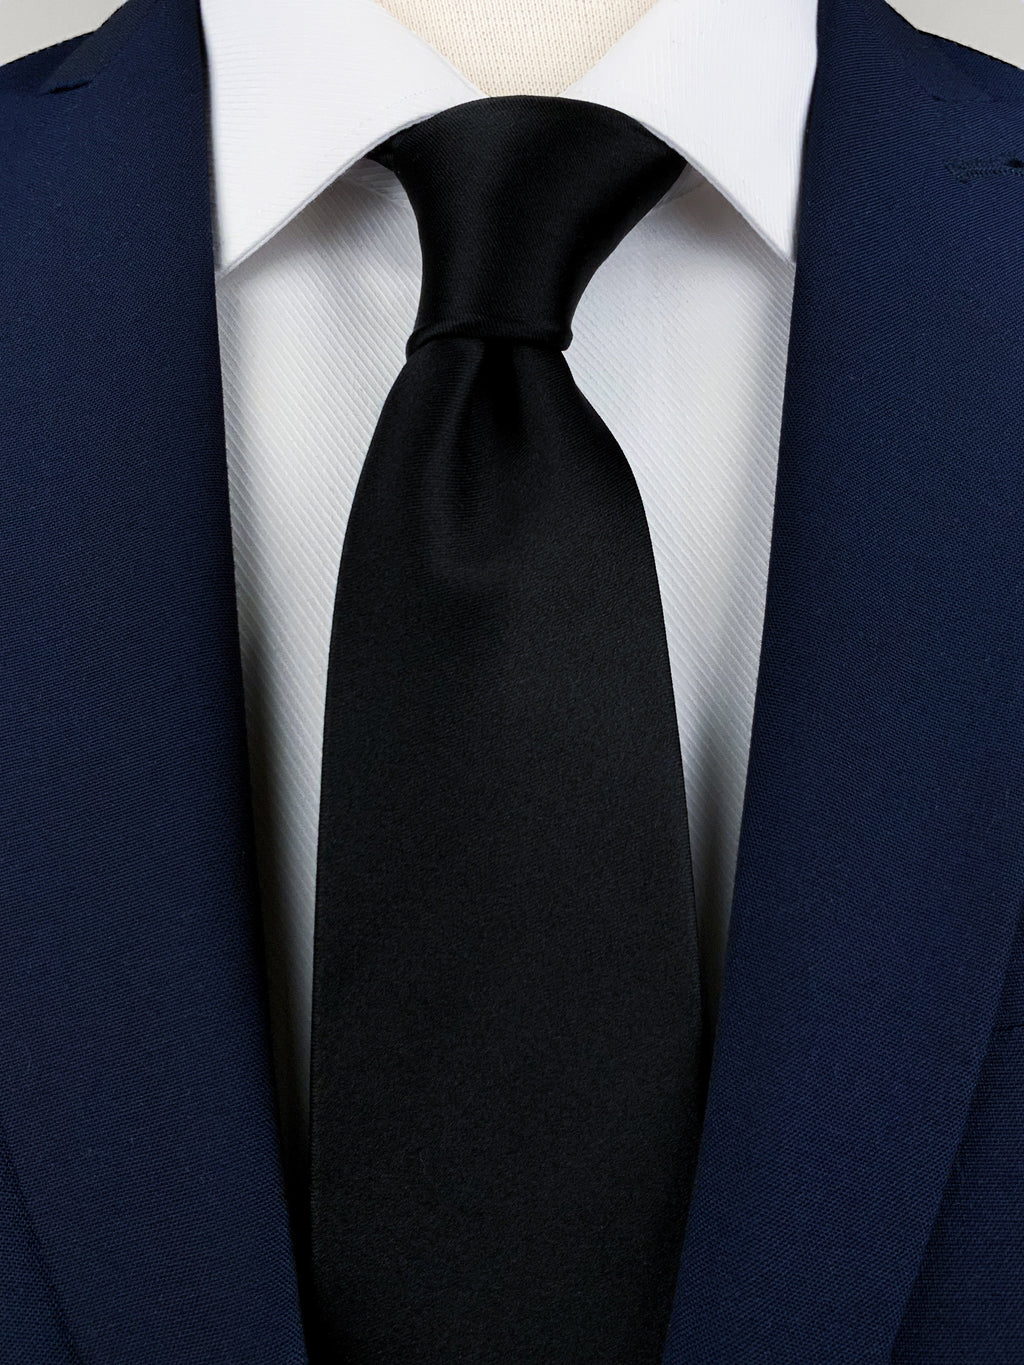 Black mulberry silk satin tie worn with a white shirt and a navy blue suit